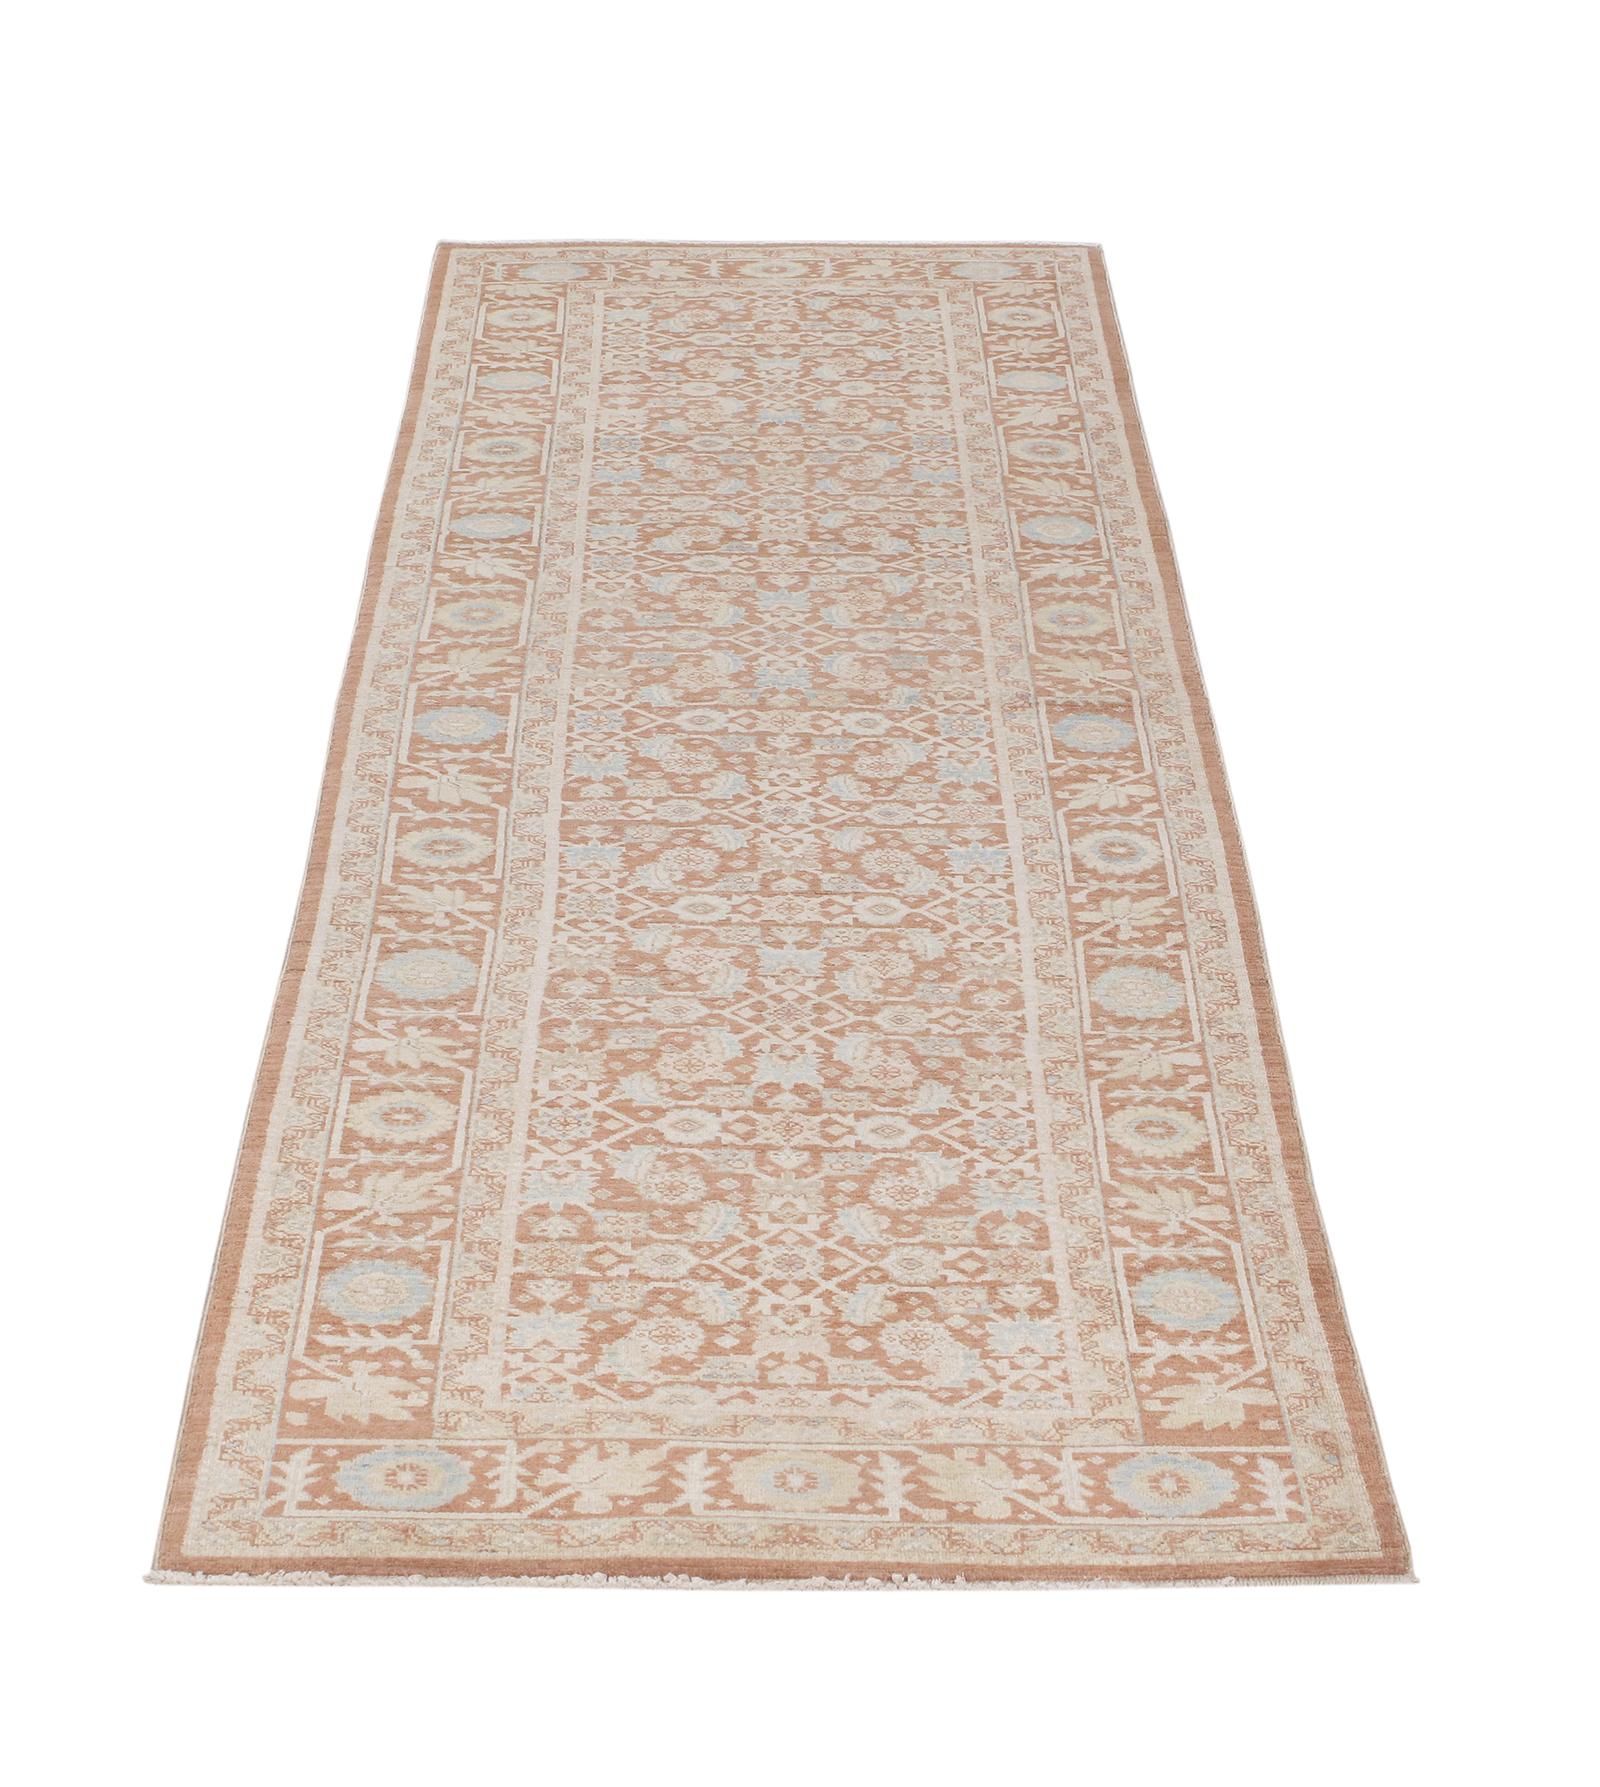 This Persian Tabriz hand-knotted runner rug is made with the finest hand-carded, hand-spun wool, and is distinguished by its excellent weave, and by the remarkable adherence to the classical traditions of Persian rug design. The city of Tabriz, in